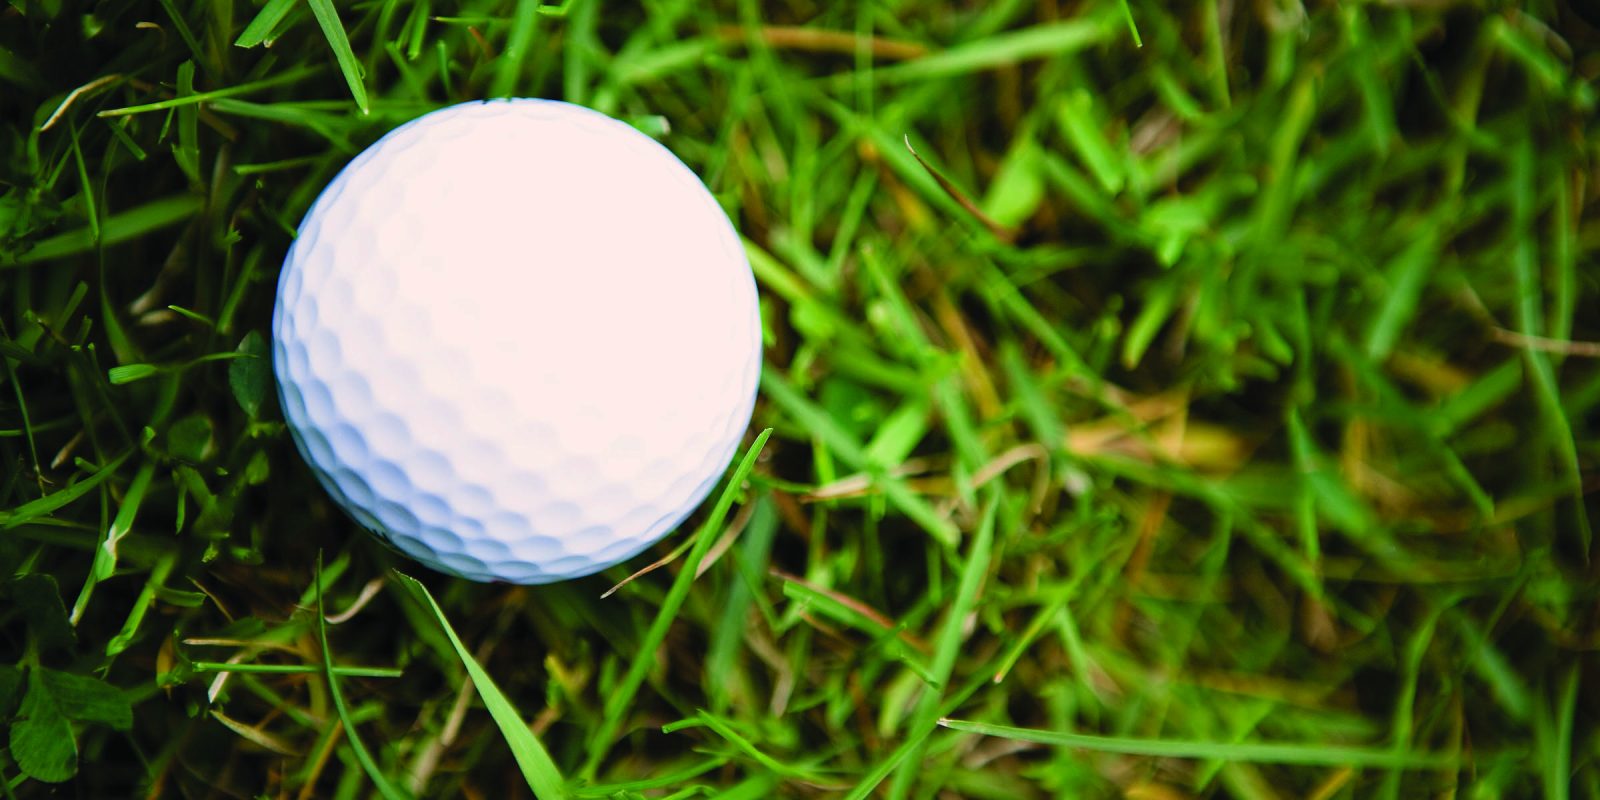 A golf ball laying in grass